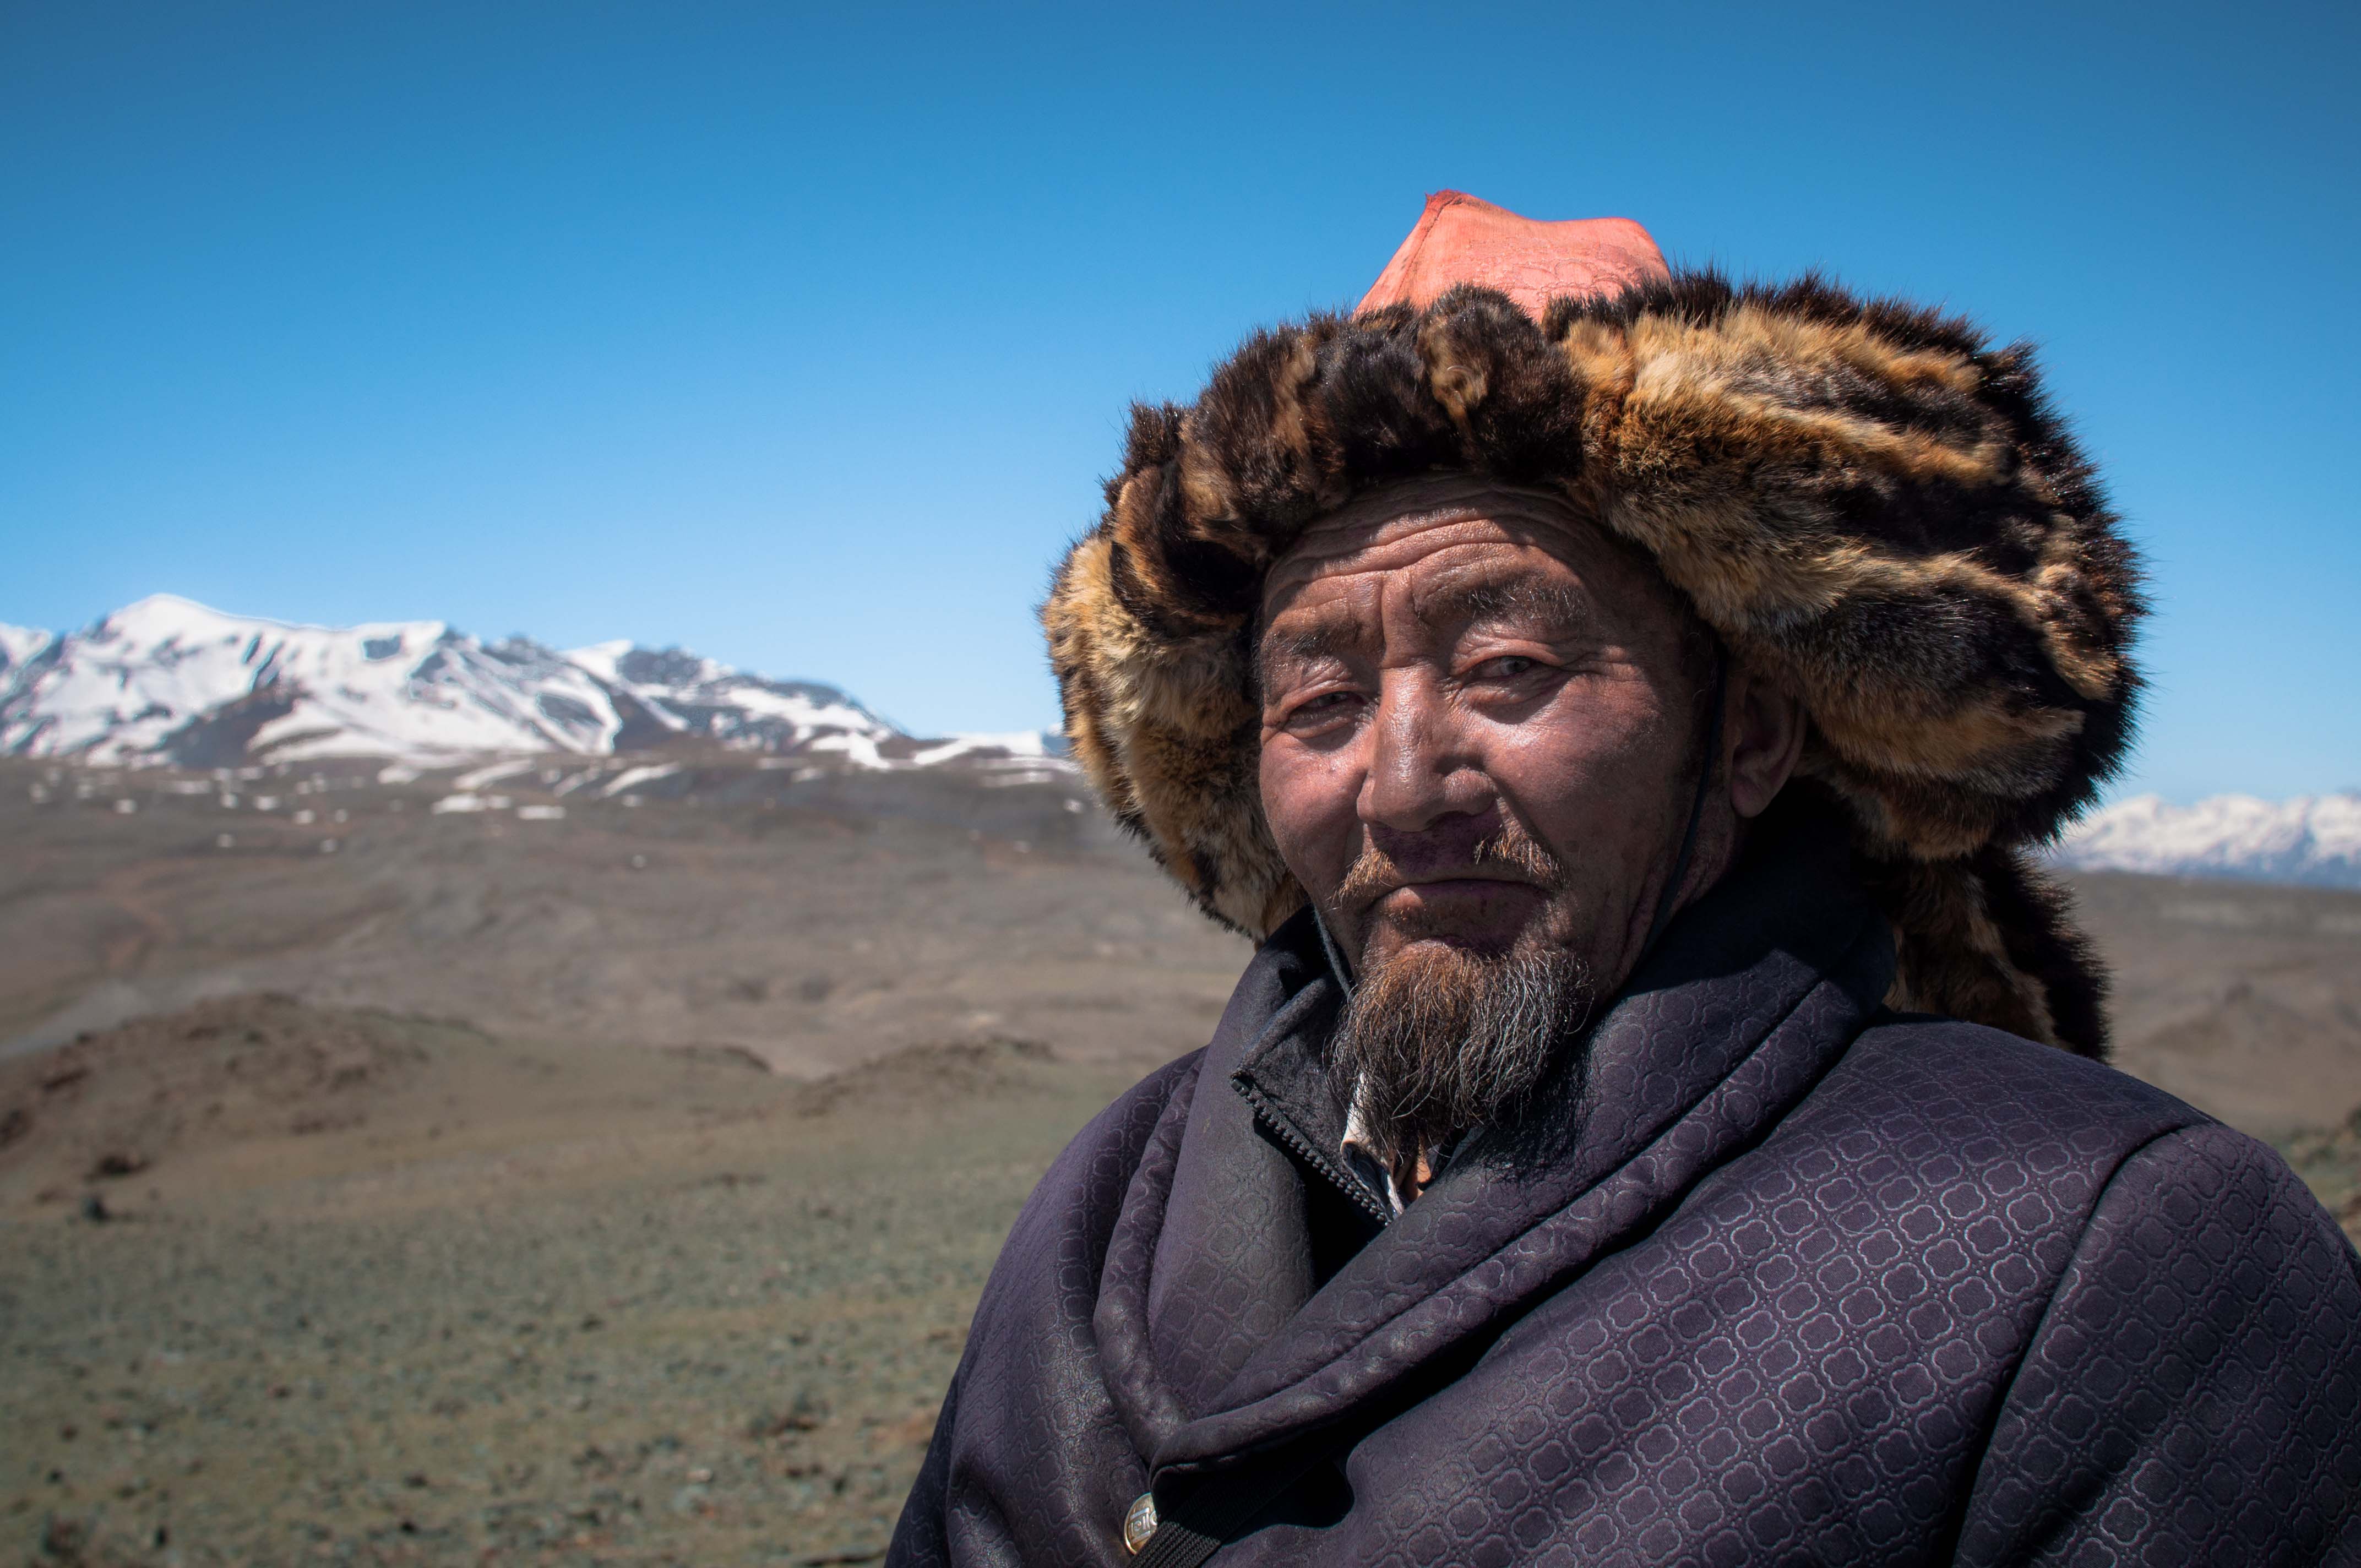 Living high in the Altai Mountains of Western Mongolia, 65 year old Sailau is among the last eagle hunters in the world. Like his father and grandfather before him, he hopes to pass down and continue this ancient tradition.